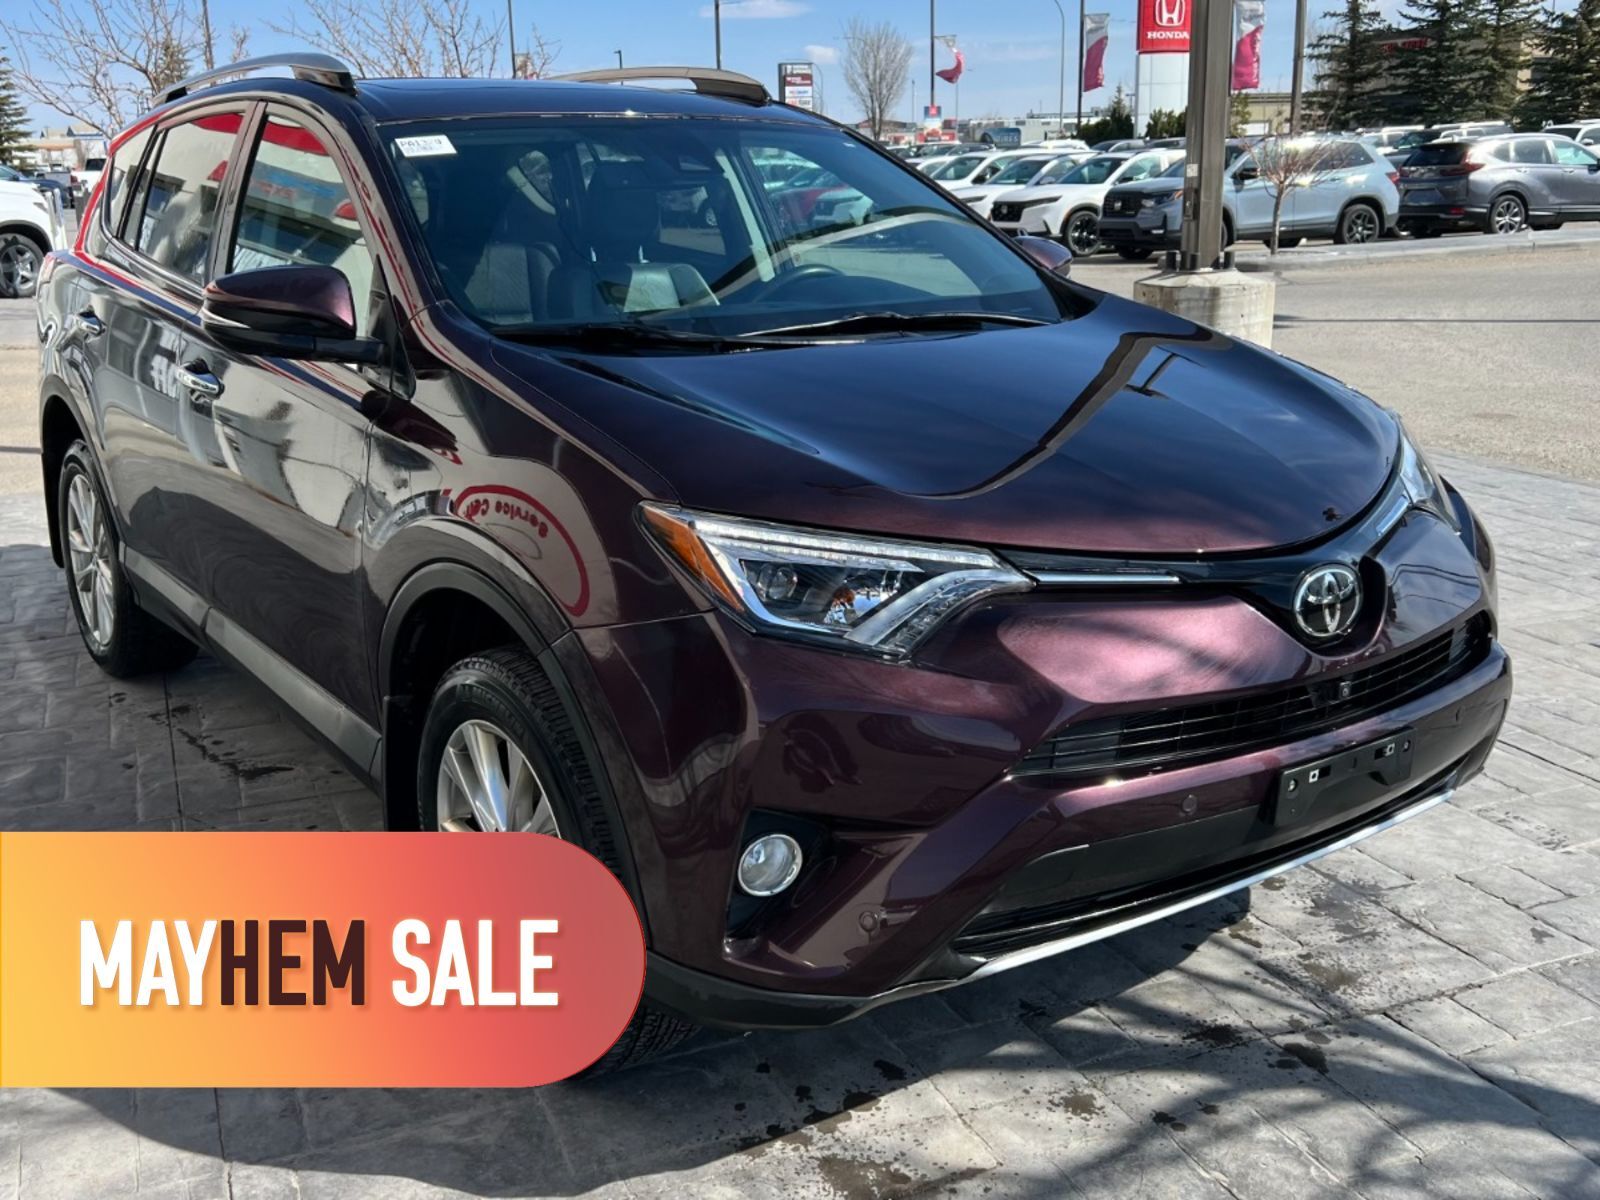 2018 Toyota RAV4 Limited - One Owner, No Accidents, Navigation